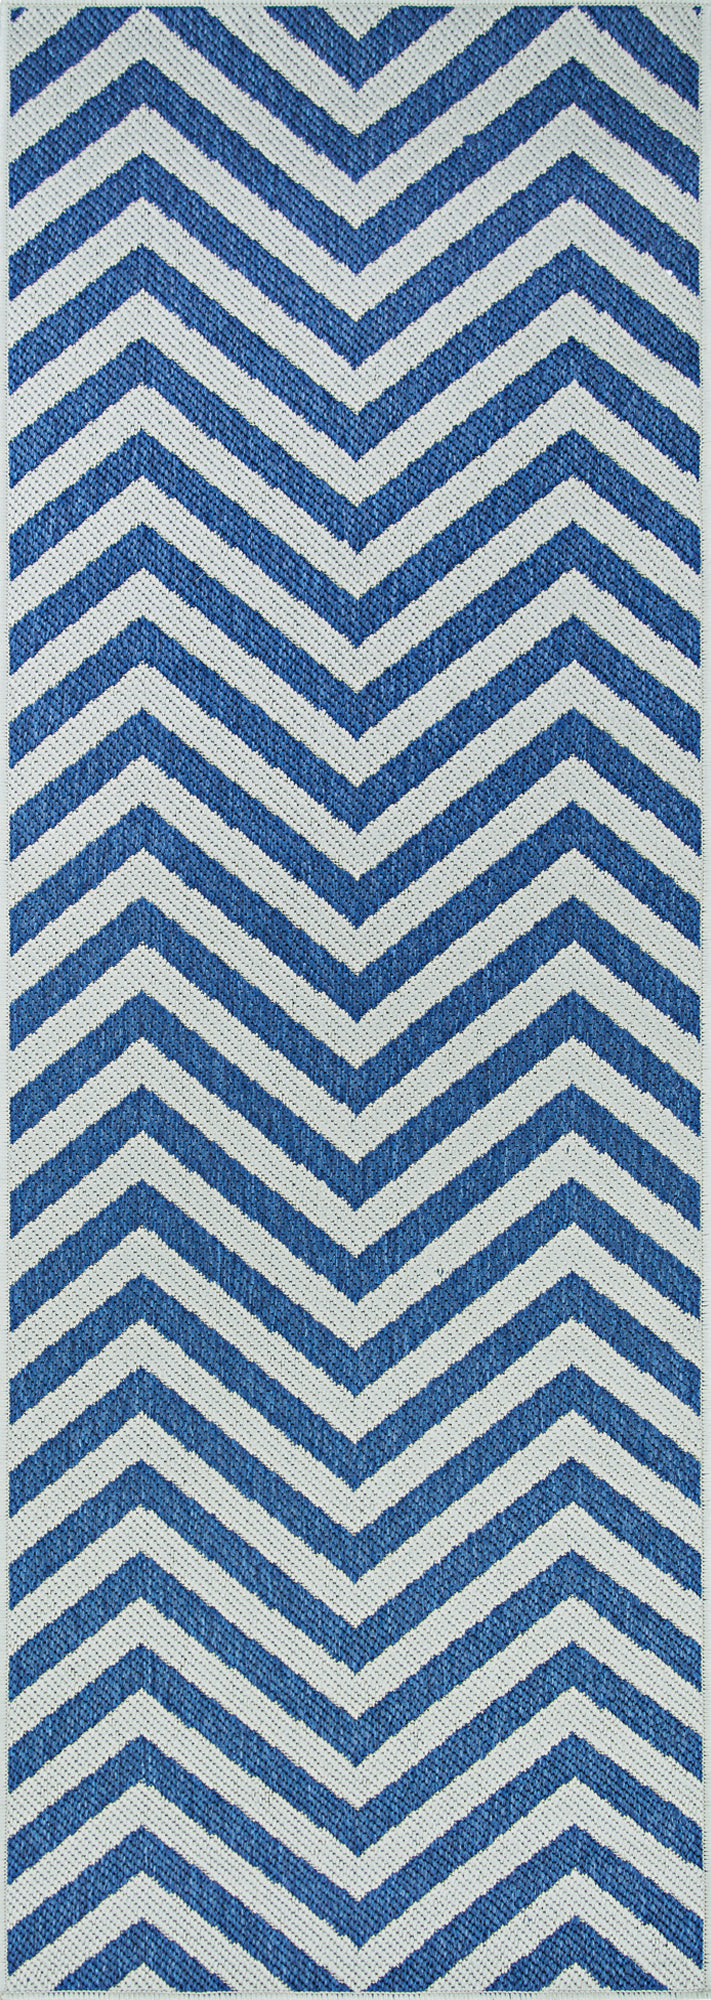 Couristan Outdurables Seaport Sea and Dune Area Rug